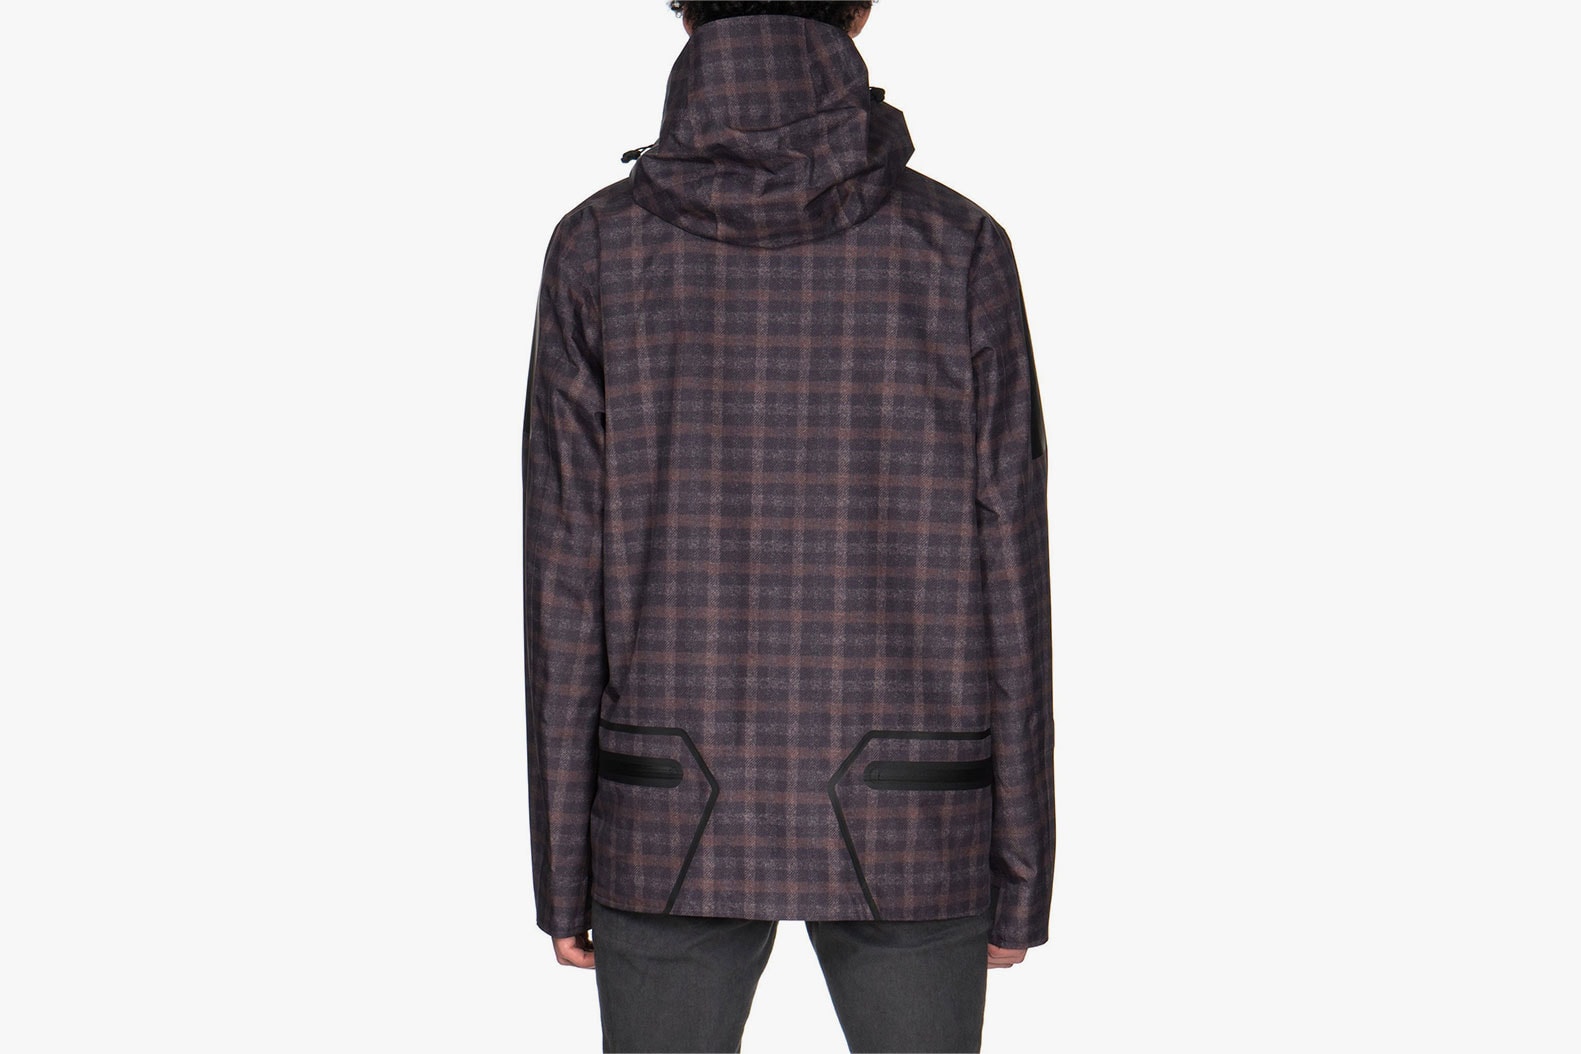 UNDERCOVER NOISE Blouson Spring Summer 2018 Outerwear UCU4202-1 noise release waterproof check purchase price